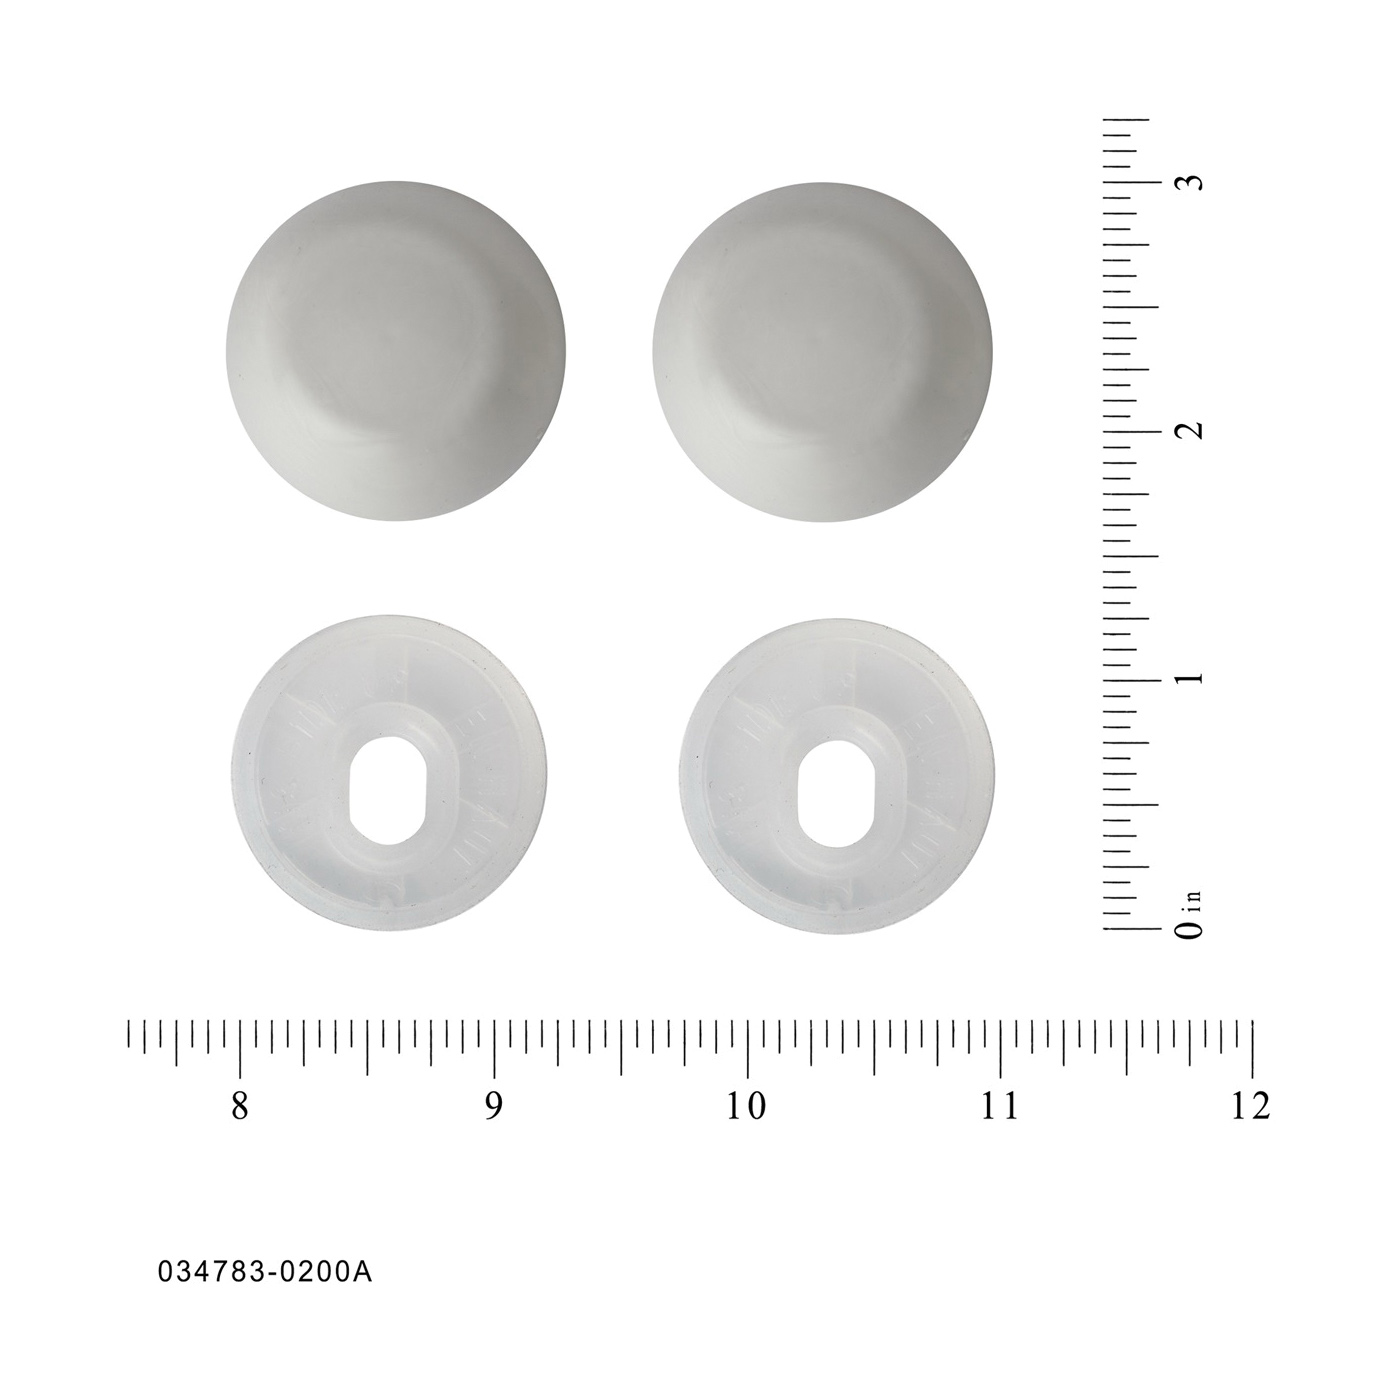 American Standard 034783-0200A Replacement Toilet Bolt Caps, For Use With Model 2034014, 215A004, 215AB004, 215AB014 and 215BA004 Toilet, White, Import